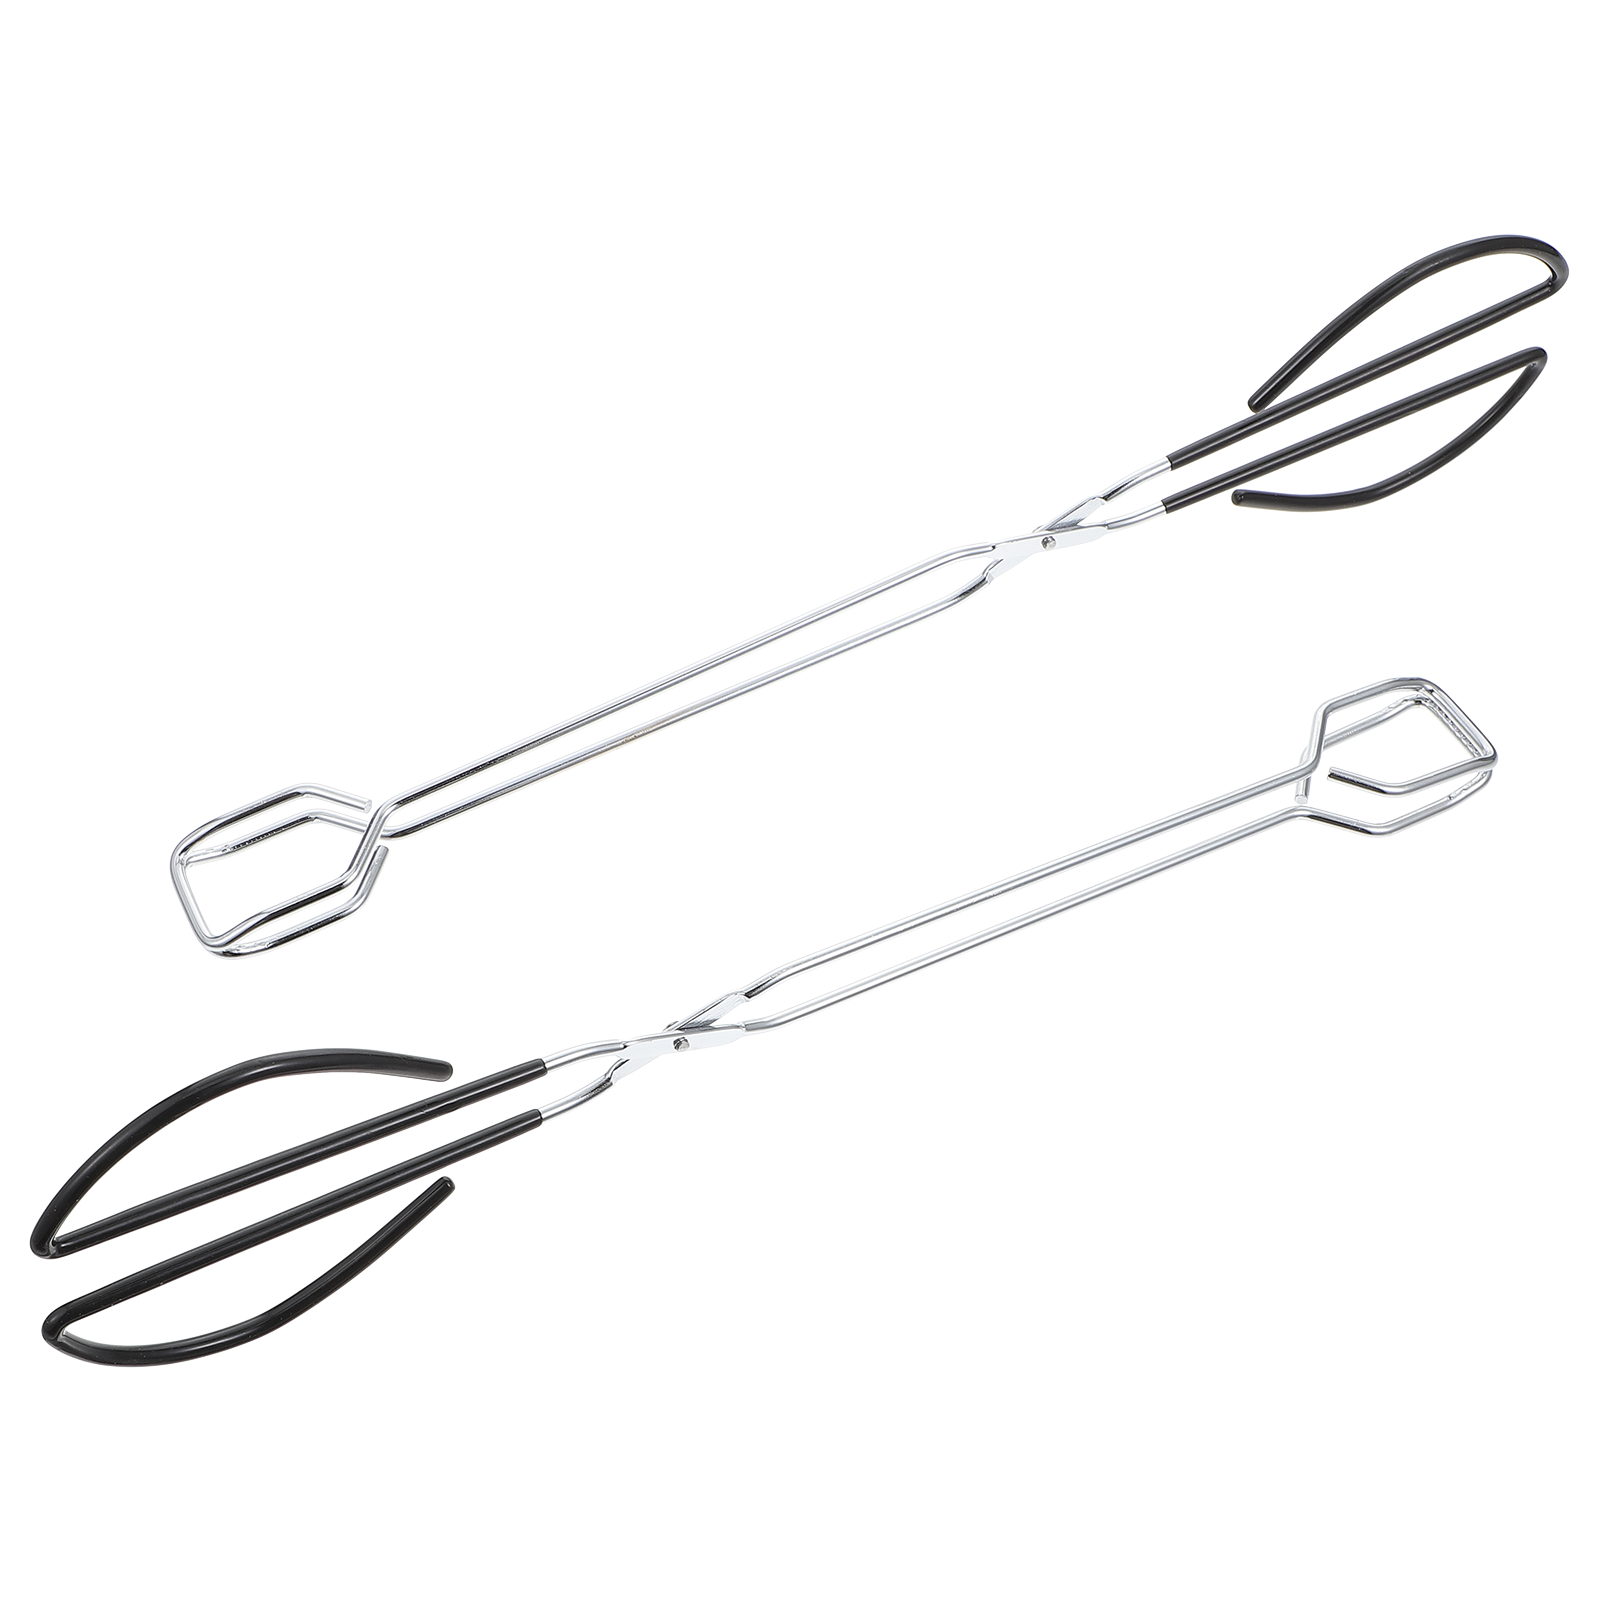 Stainless Steel Food Clip, Food Tong, Food Clamp, Barbecue Clip, Barbecue Clamp2Pcs Practical Food Clips Household Barbecue Tongs Steak Serving Clamps (Silver) - image 4 of 8